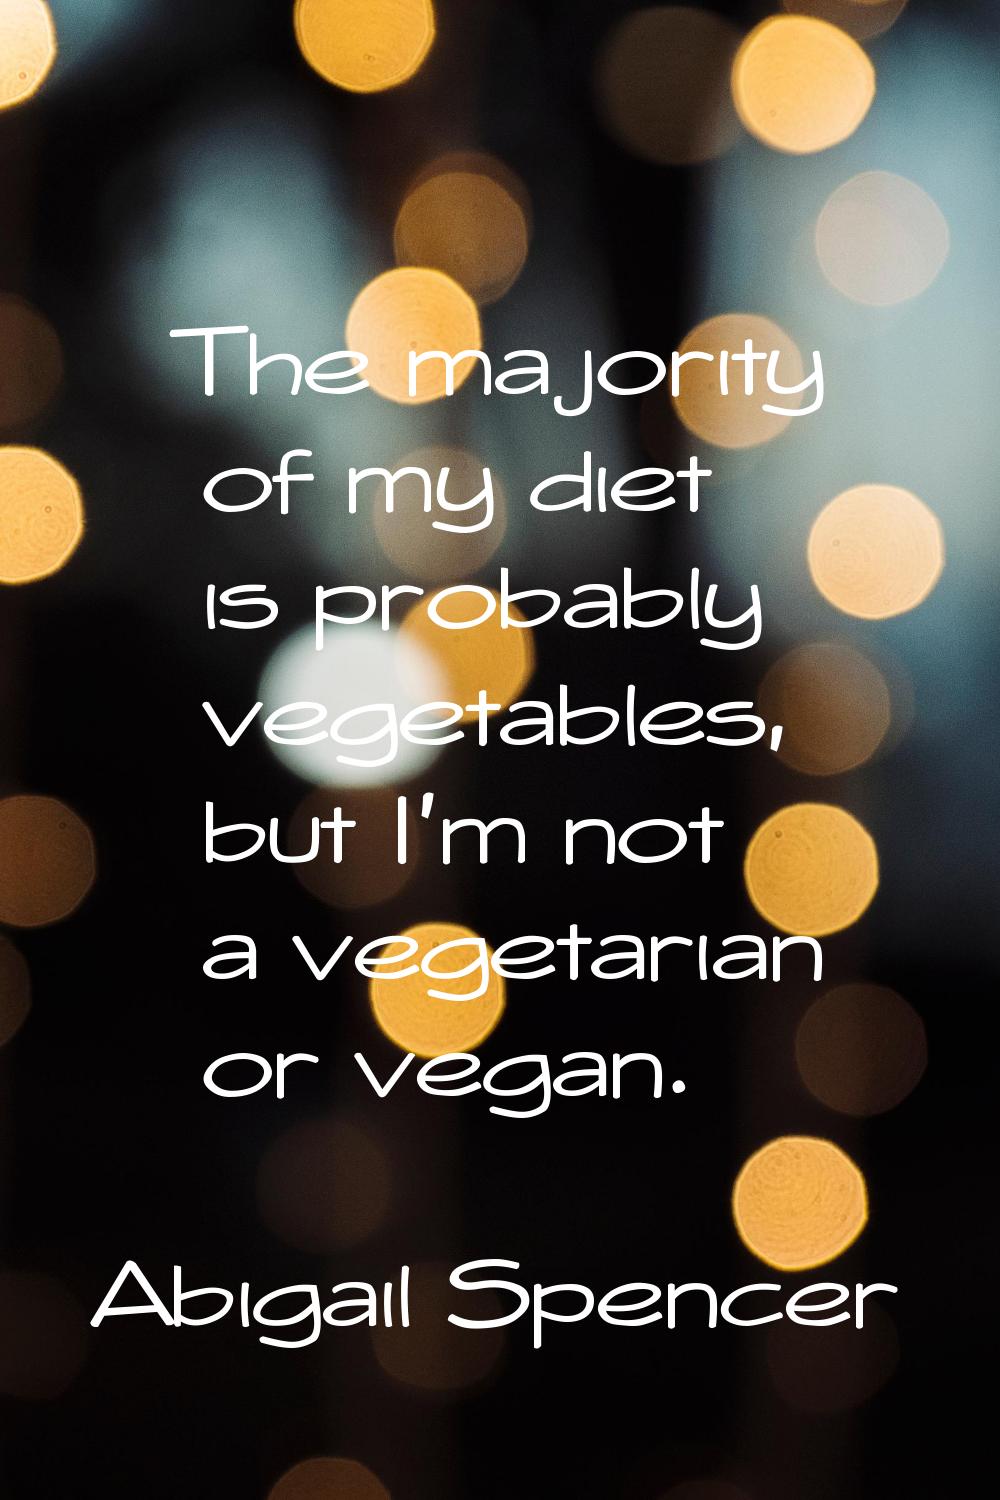 The majority of my diet is probably vegetables, but I'm not a vegetarian or vegan.